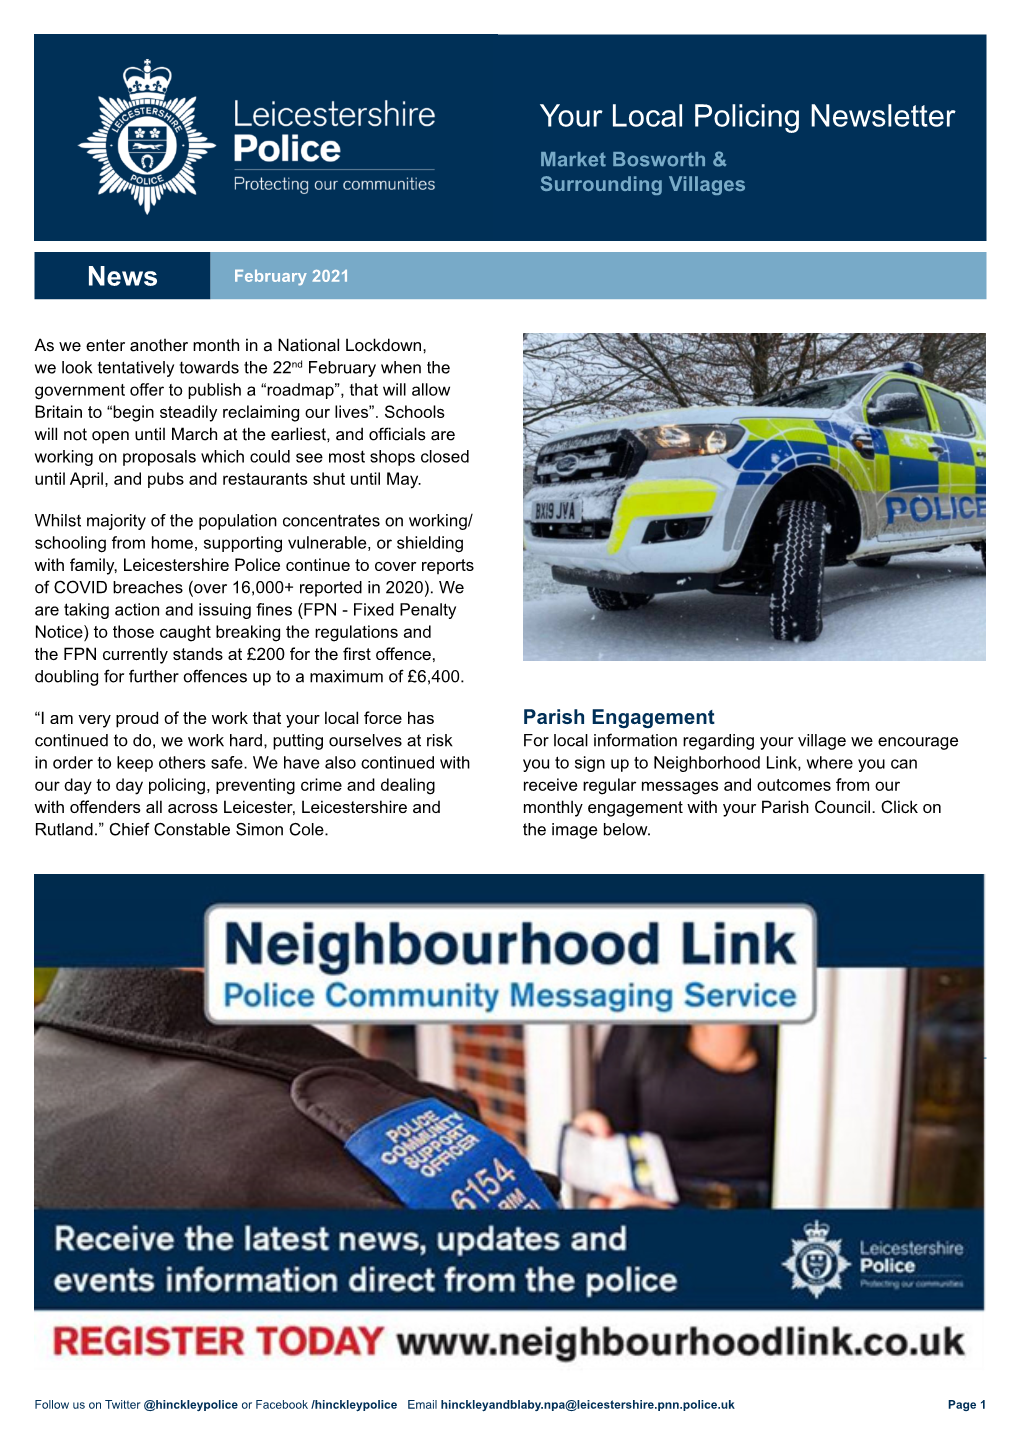 Your Local Policing Newsletter Market Bosworth & Surrounding Villages